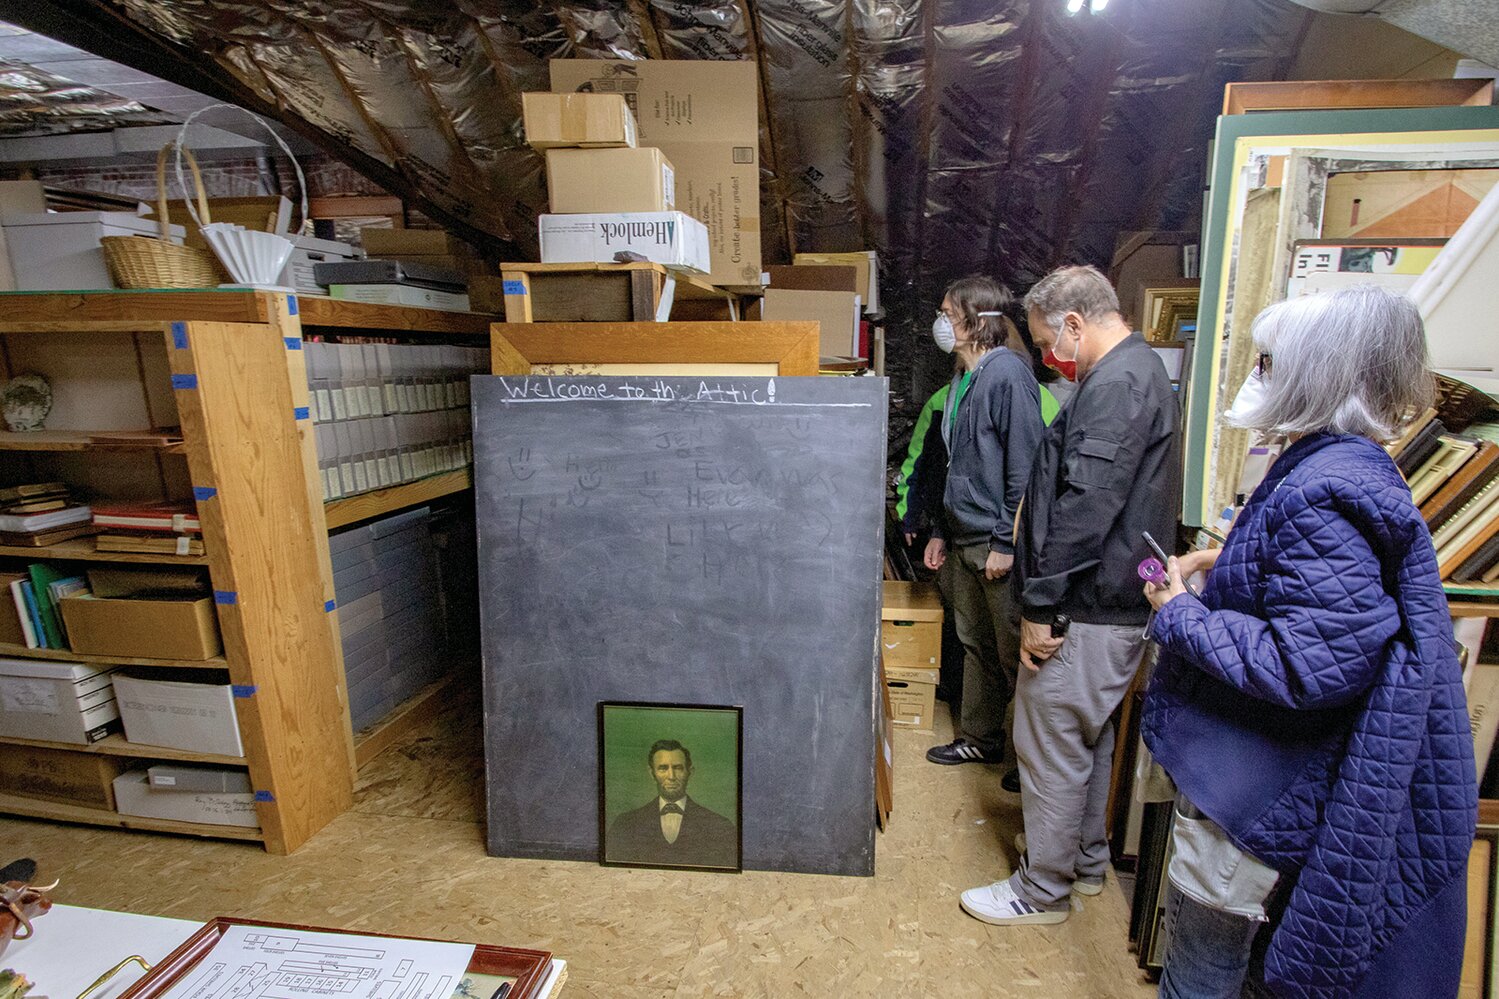 During the ghost tours of the Lewis County Historical Museum on Saturday, Oct. 28, attendees were given the opportunity to explore the museum's attic, where former employees have reported experiencing paranormal activity.